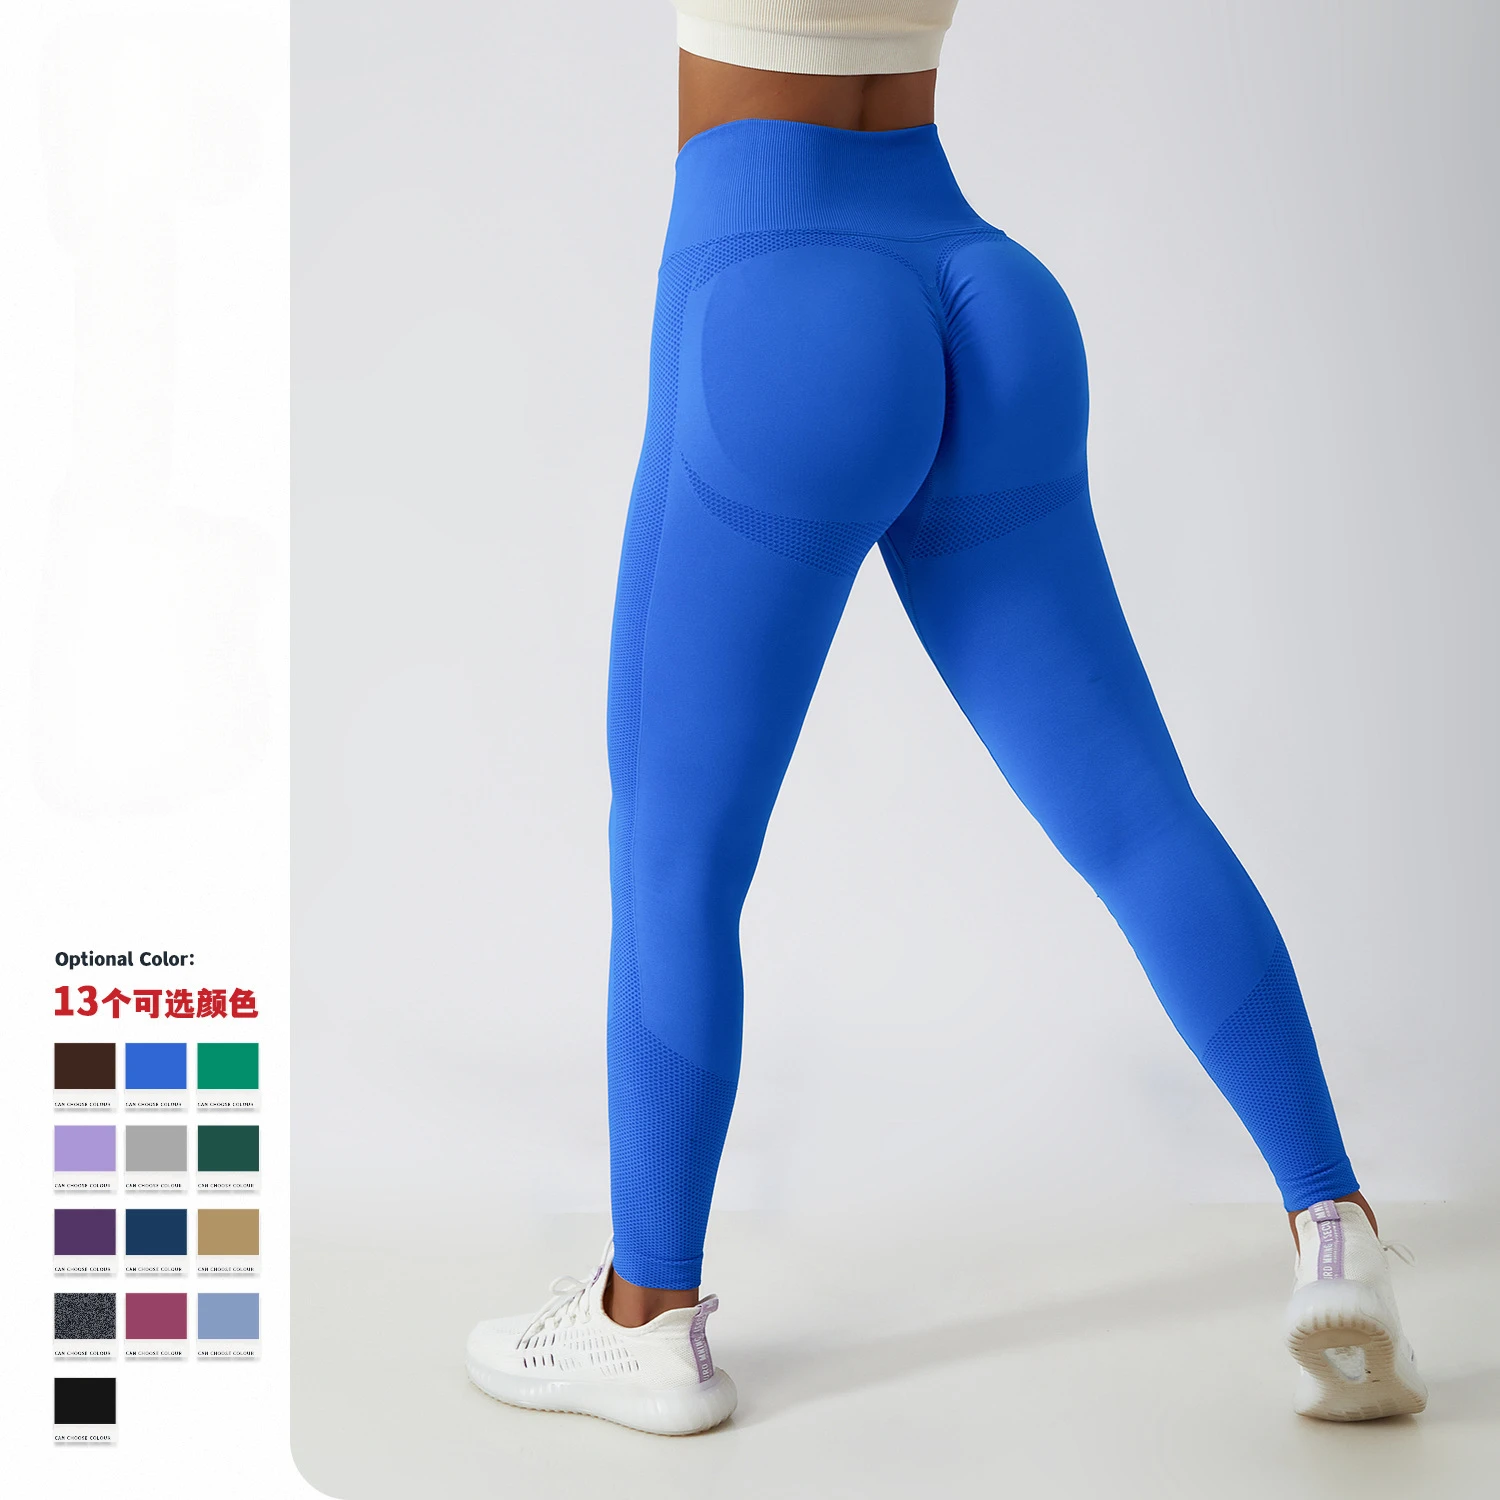 Outdoor running fitness pants, hip lifting yoga pants, seamless tight fitting, high waisted, breathable sports for women